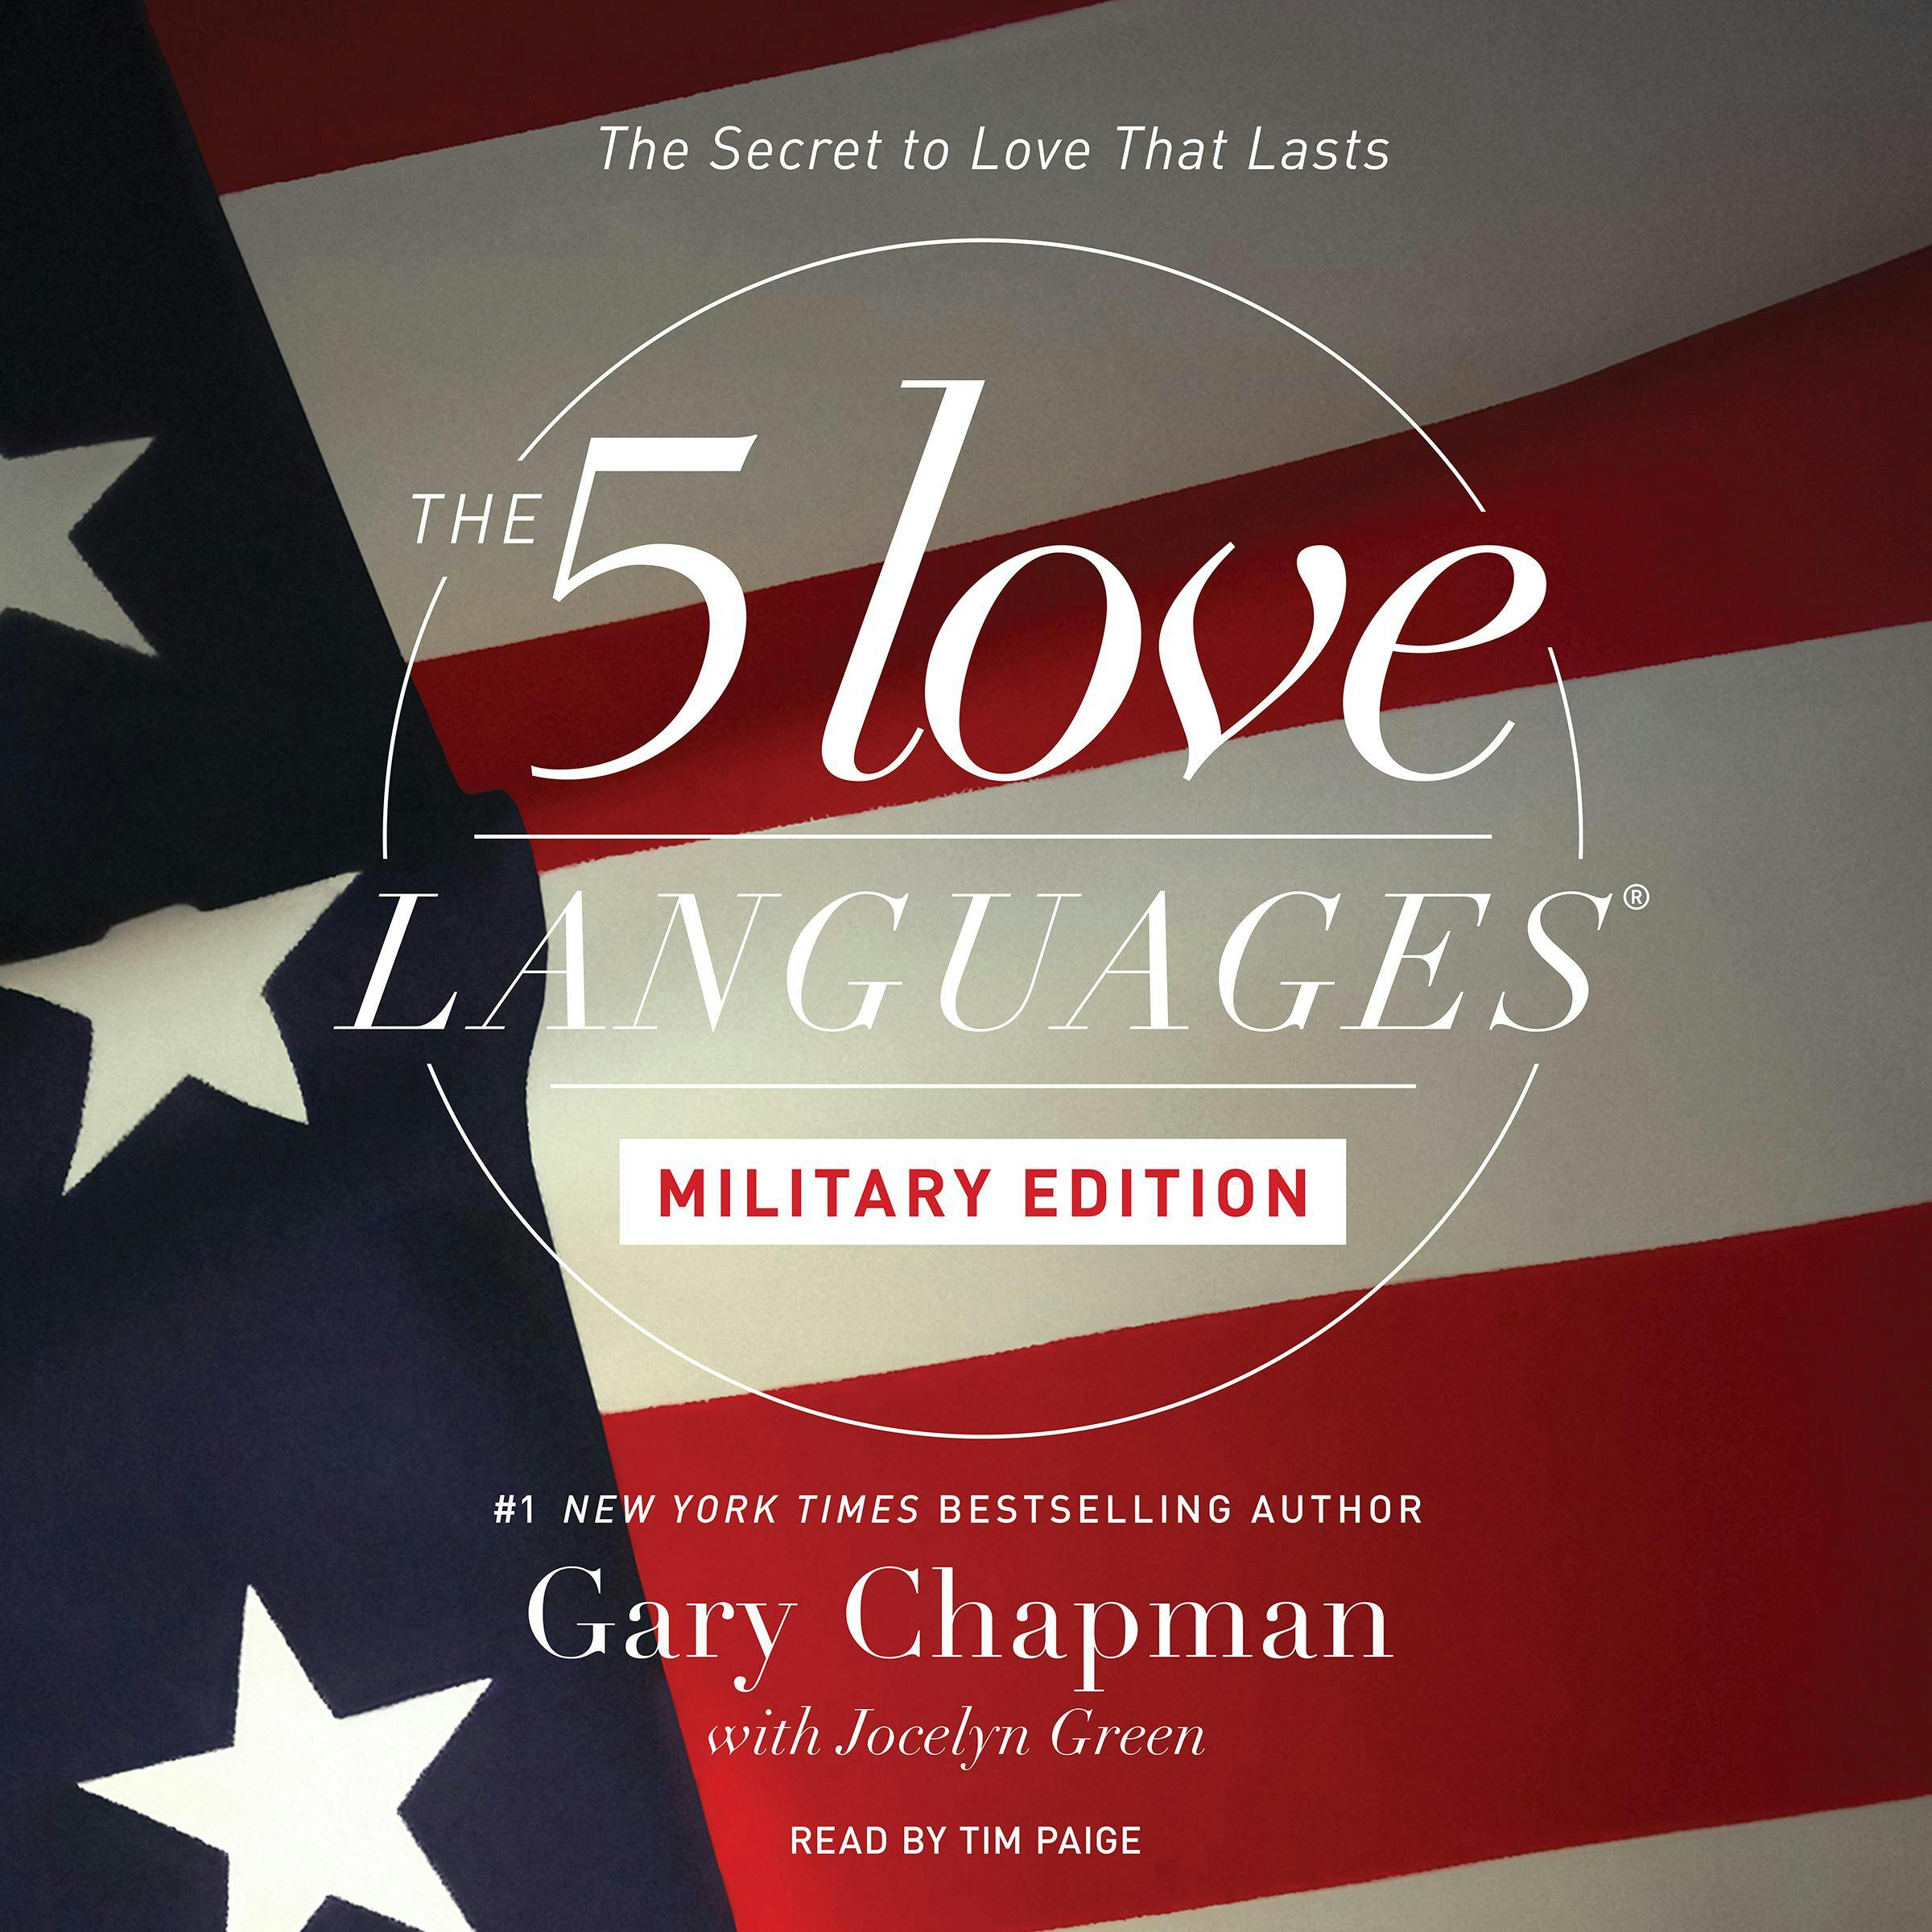 The 5 Love Languages: Military Edition: The Secret to Love That Lasts - Gary Chapman, Jocelyn Green